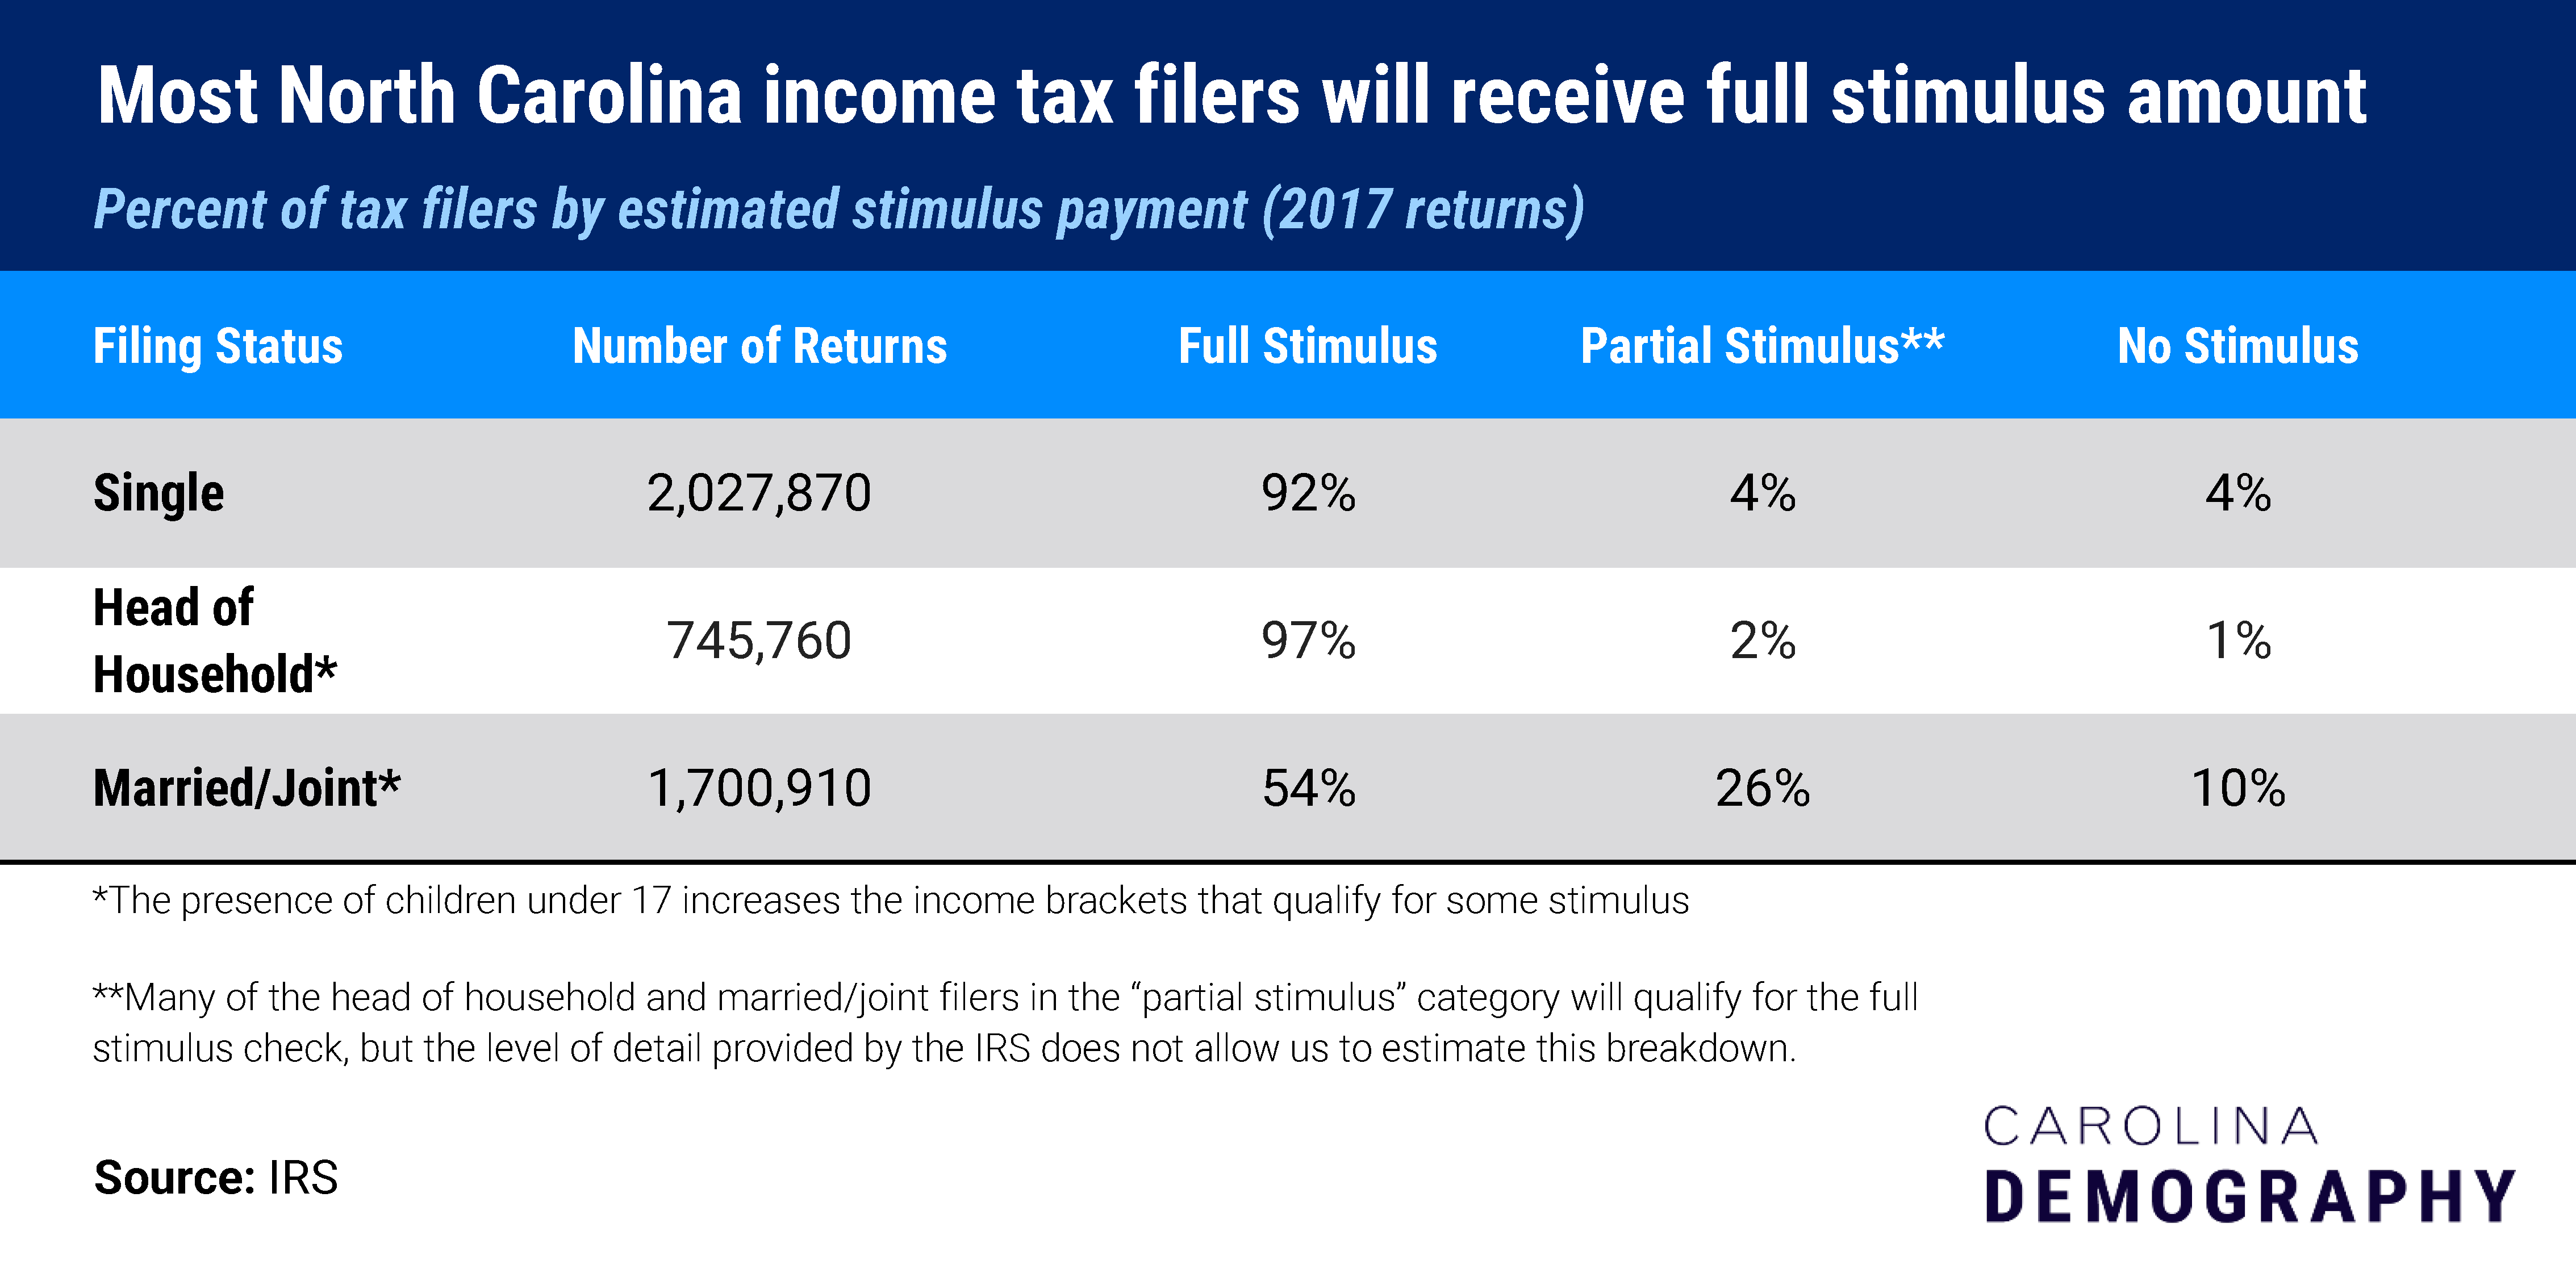 Table Title: Most North Carolina income tax filers will receive full stimulus amount Table subtitle: Percent of tax filers by estimated stimulus payment (2017 returns) Filing Status Number of Returns Full Stimulus Partial Stimulus** No Stimulus Single 2,027,870 92% 4% 4% Head of Household* 745,760 97% 2% 1% Married/Joint* 1,700,910 54% 26% 10% *The presence of children under 17 increases the income brackets that qualify for some stimulus **Many of the head of household and married/joint filers in the “partial stimulus” category will qualify for the full stimulus check, but the level of detail provided by the IRS does not allow us to estimate this breakdown. Source: IRS